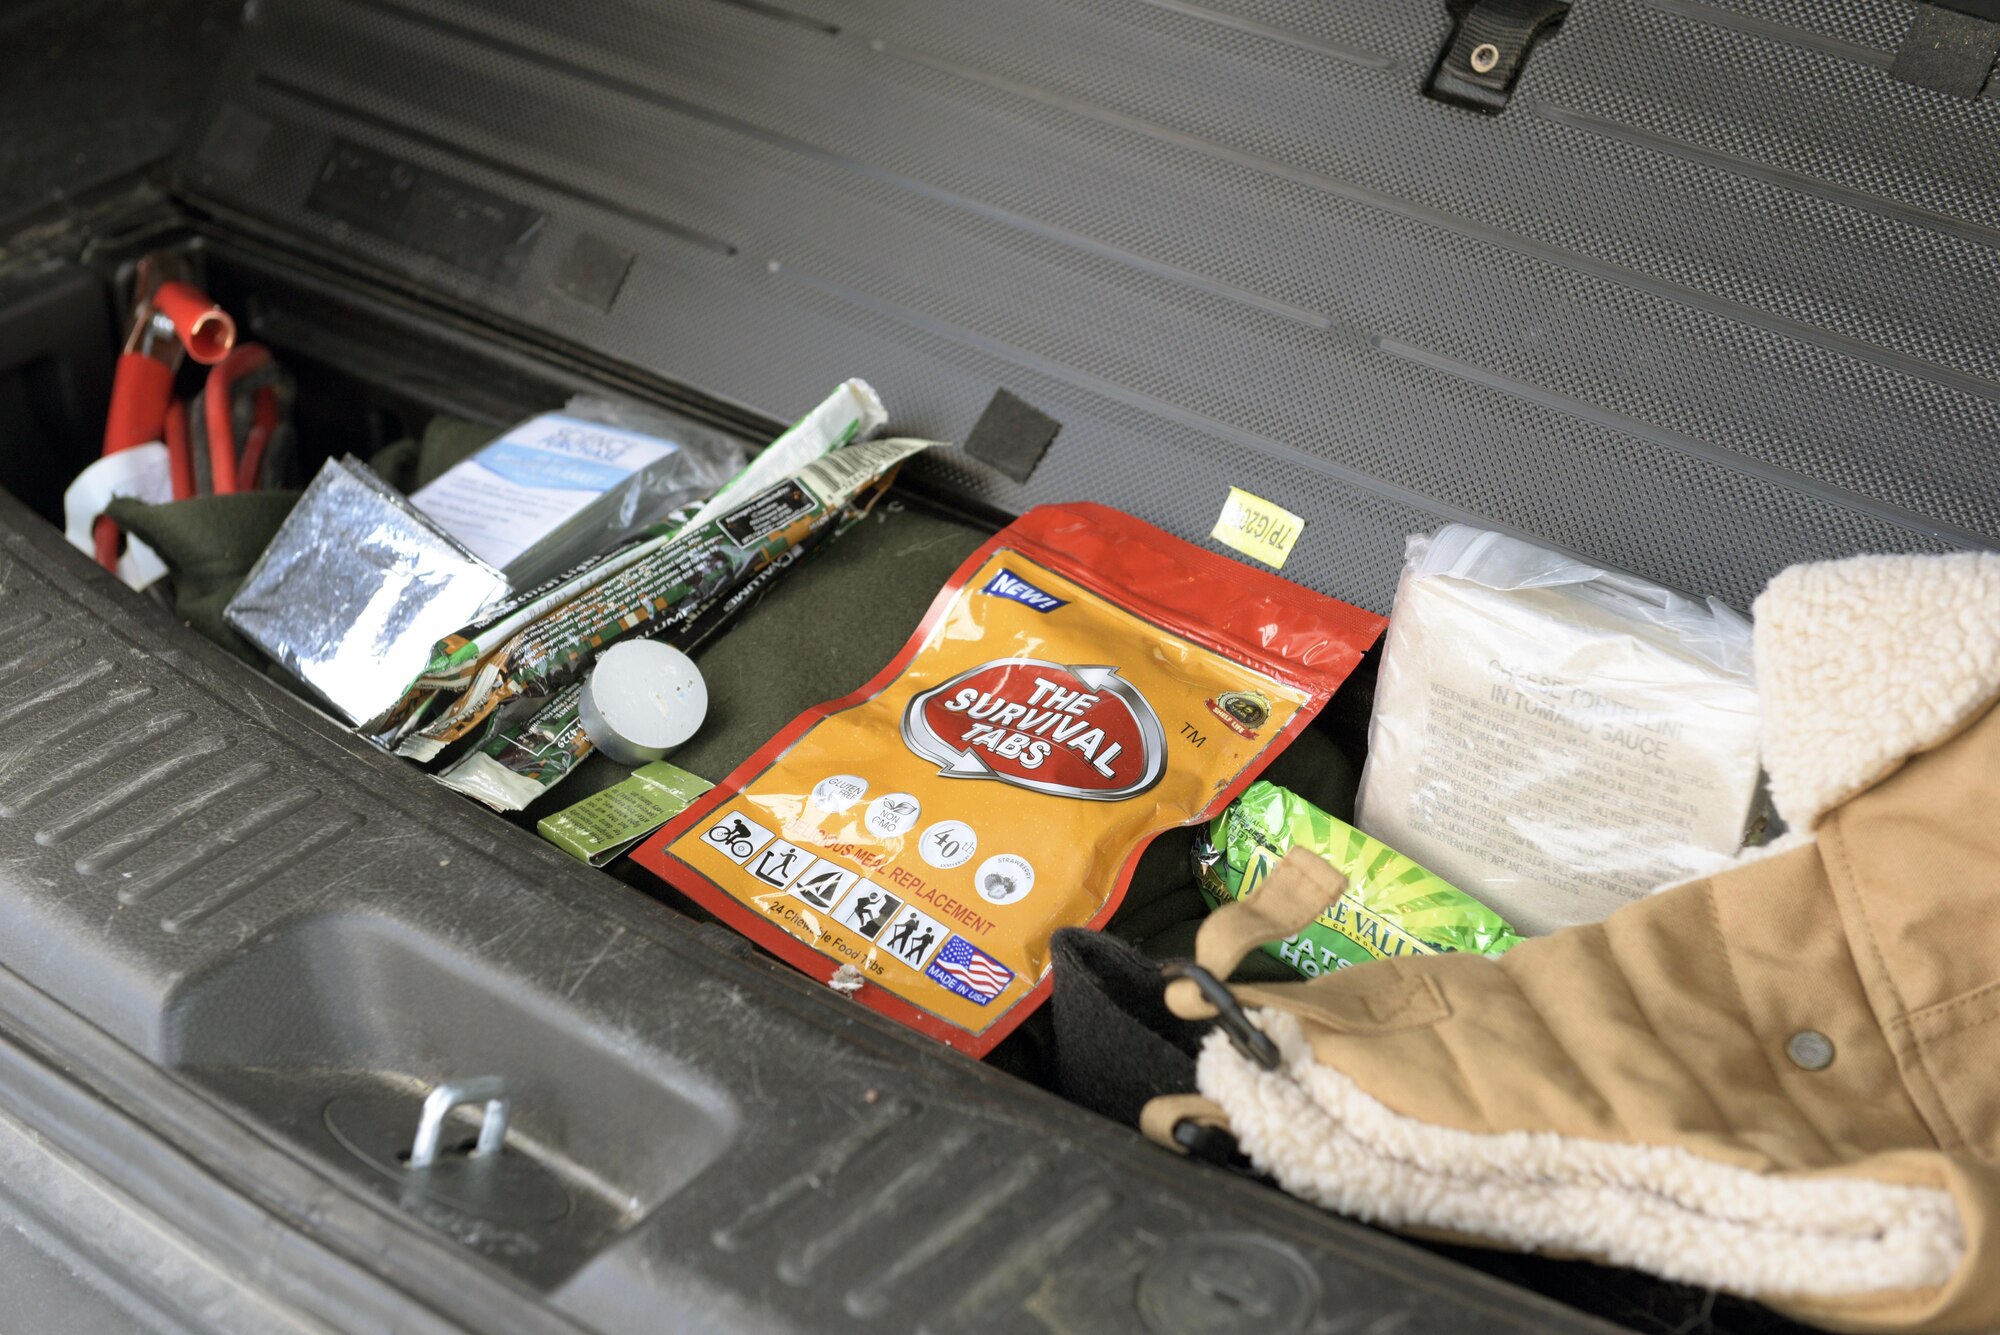 Pictured are winter survival items located in the back of a vehicle in Peoria, Ill., Jan. 7, 2017. In the event of becoming stranded, items such as a blanket, flashlight, cellphone charger and snacks, said Tech. Sgt. Cindy Hawkins, a safety specialist with the 182nd Airlift Wing. (U.S. Air National Guard photo by Airman 1st Class Jason Grabiec)